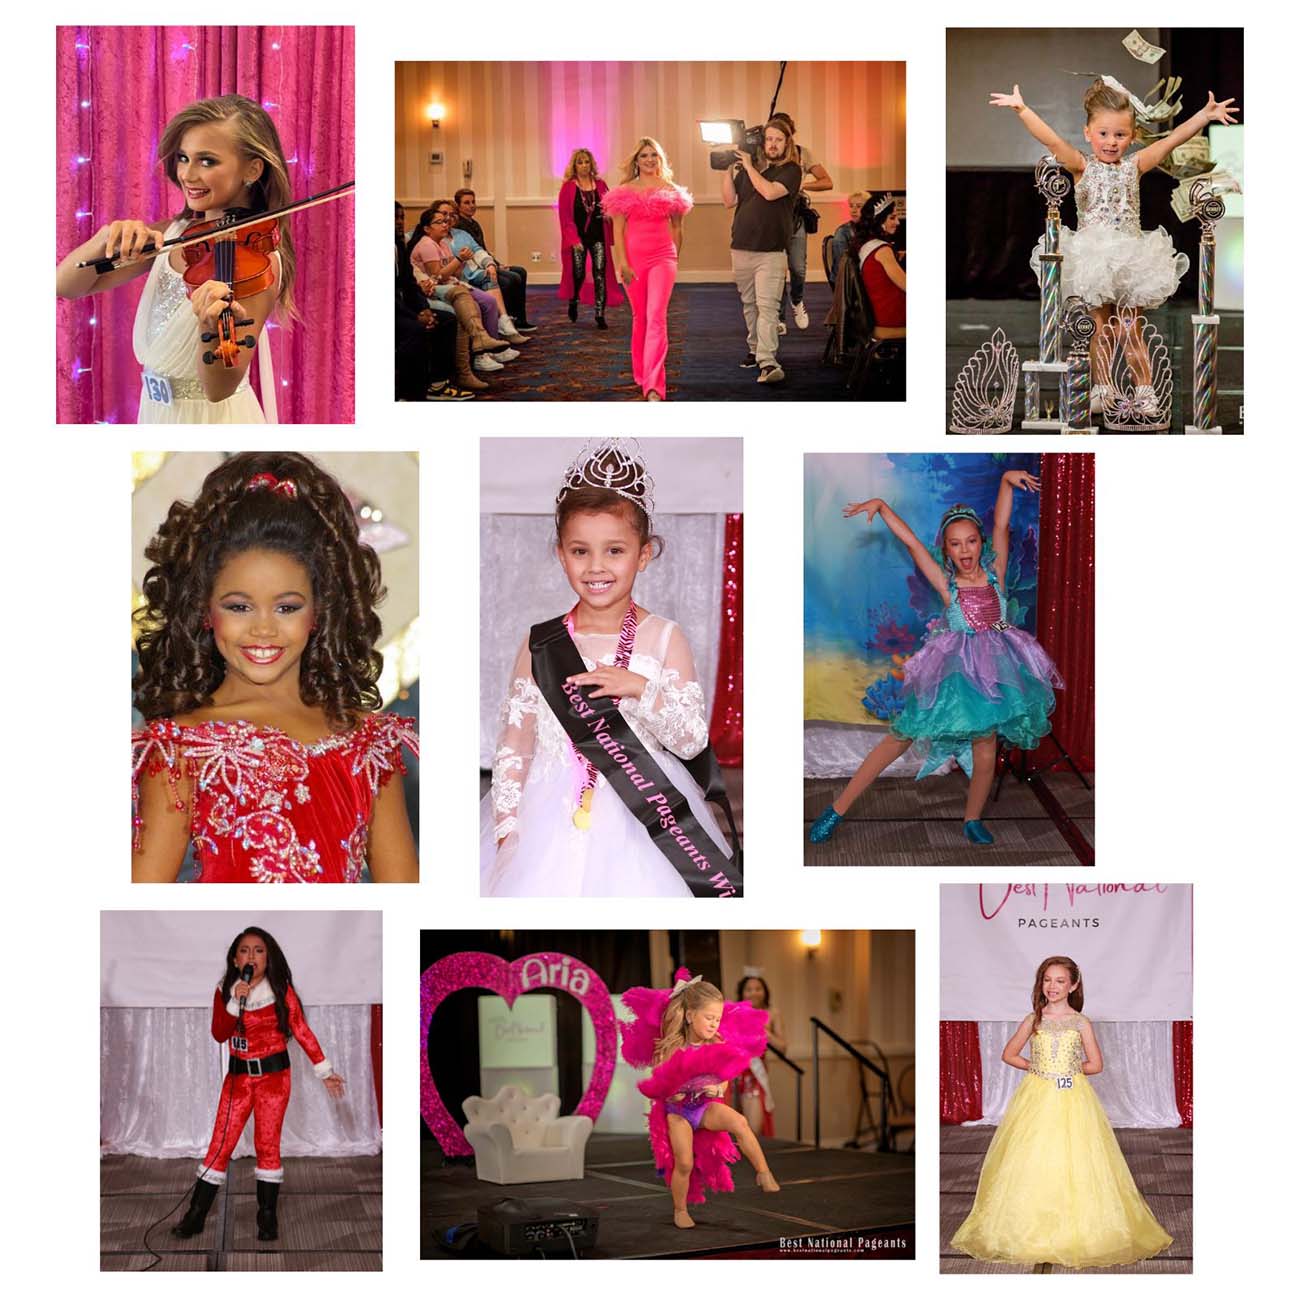 Best National Pageants Collage